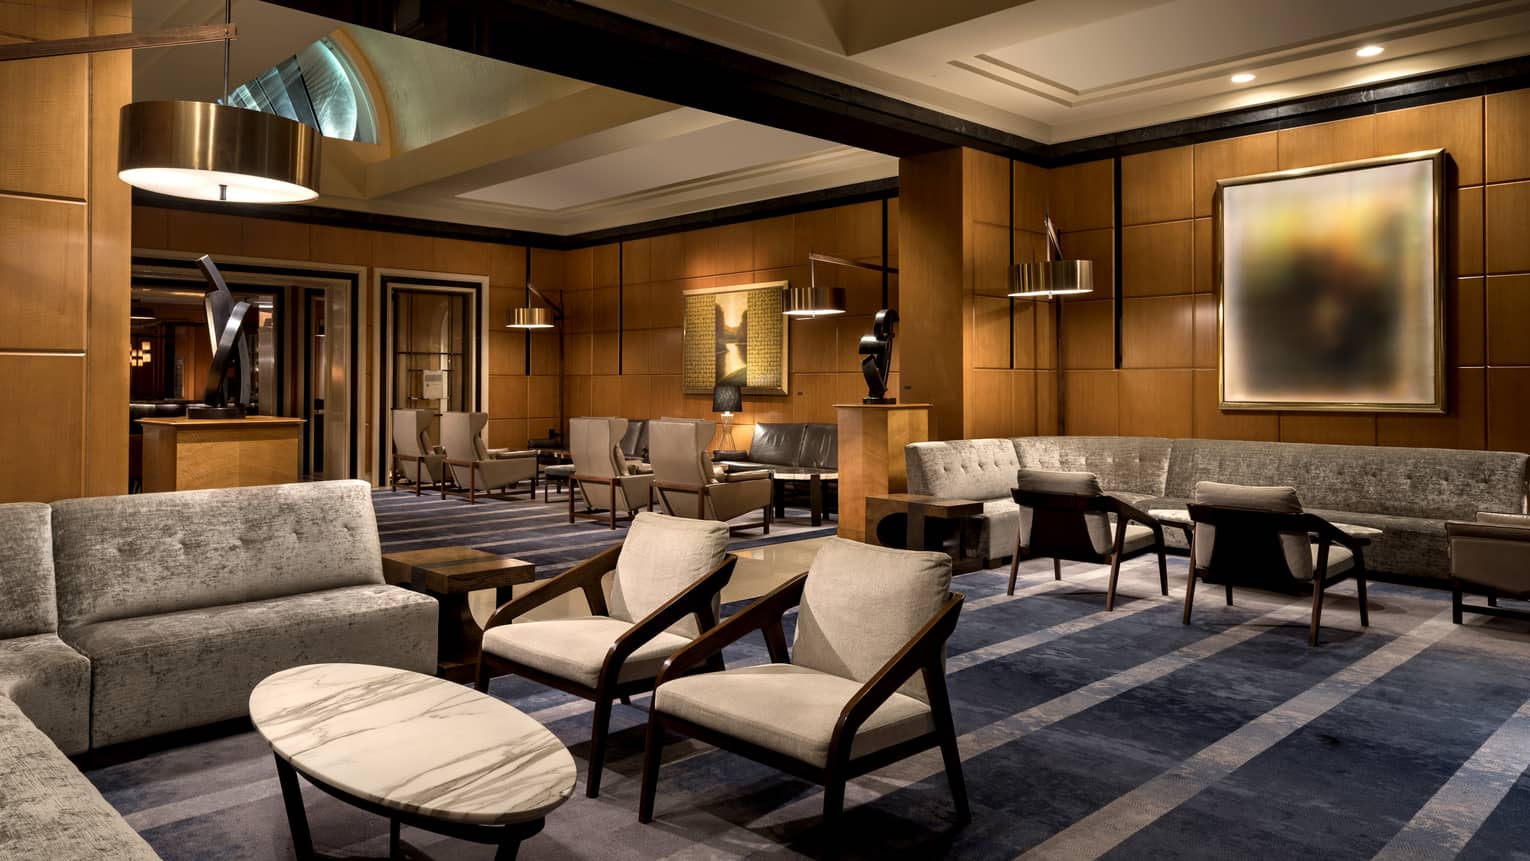 A lounge and lobby area with dark blue carpeting, grey chairs and sofa, and wood walls.